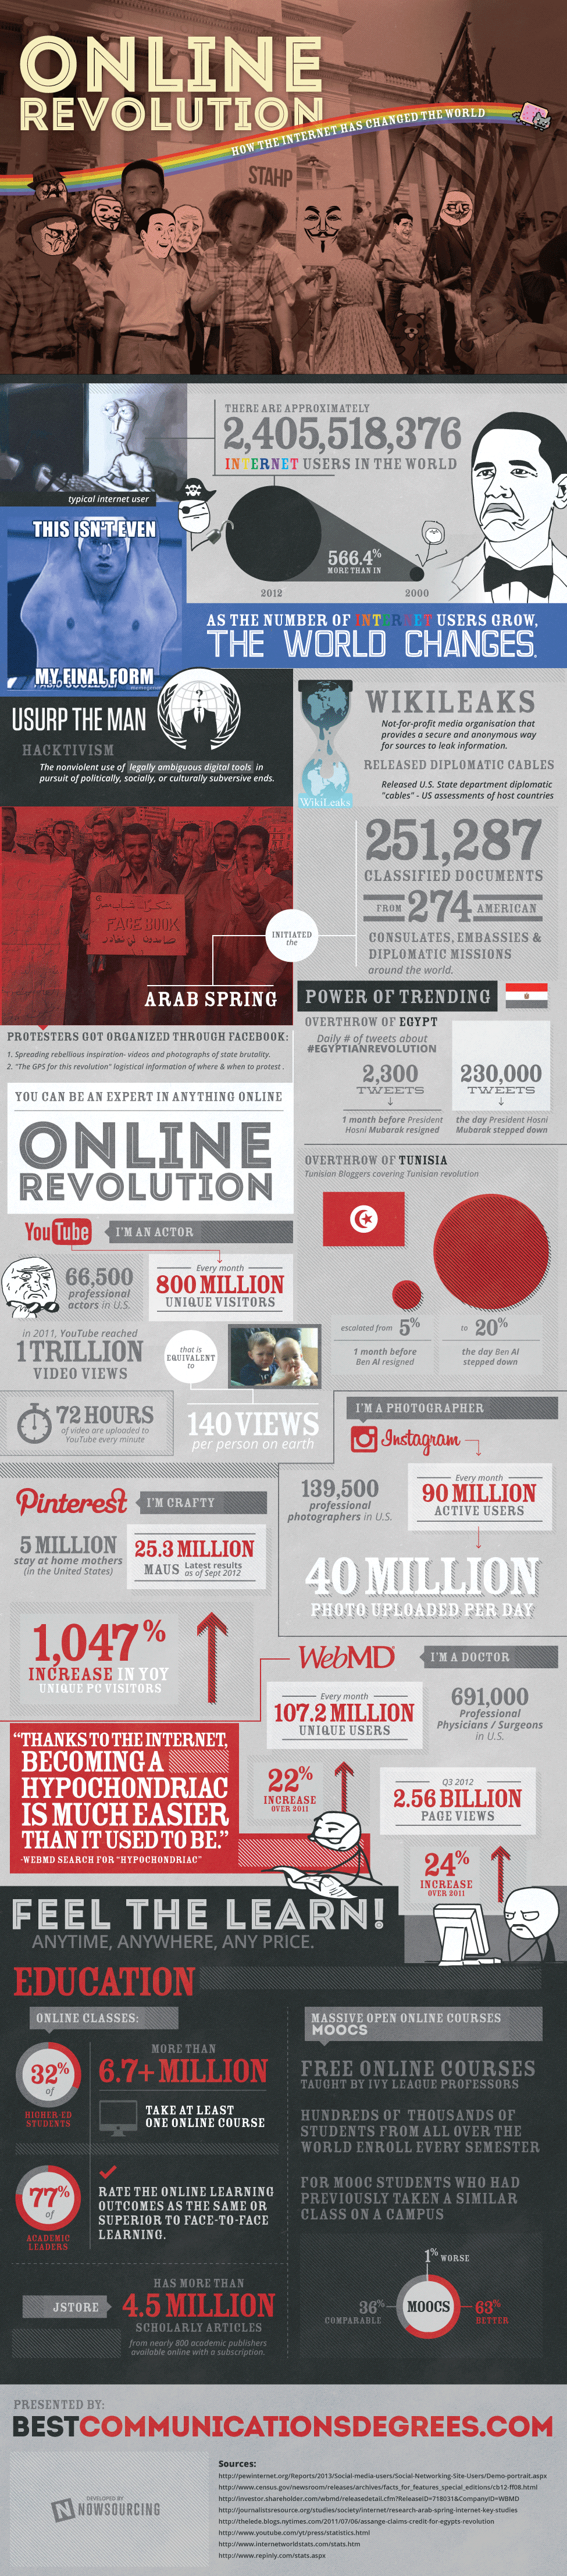 Online Revolution: How the Internet Has Changed the World